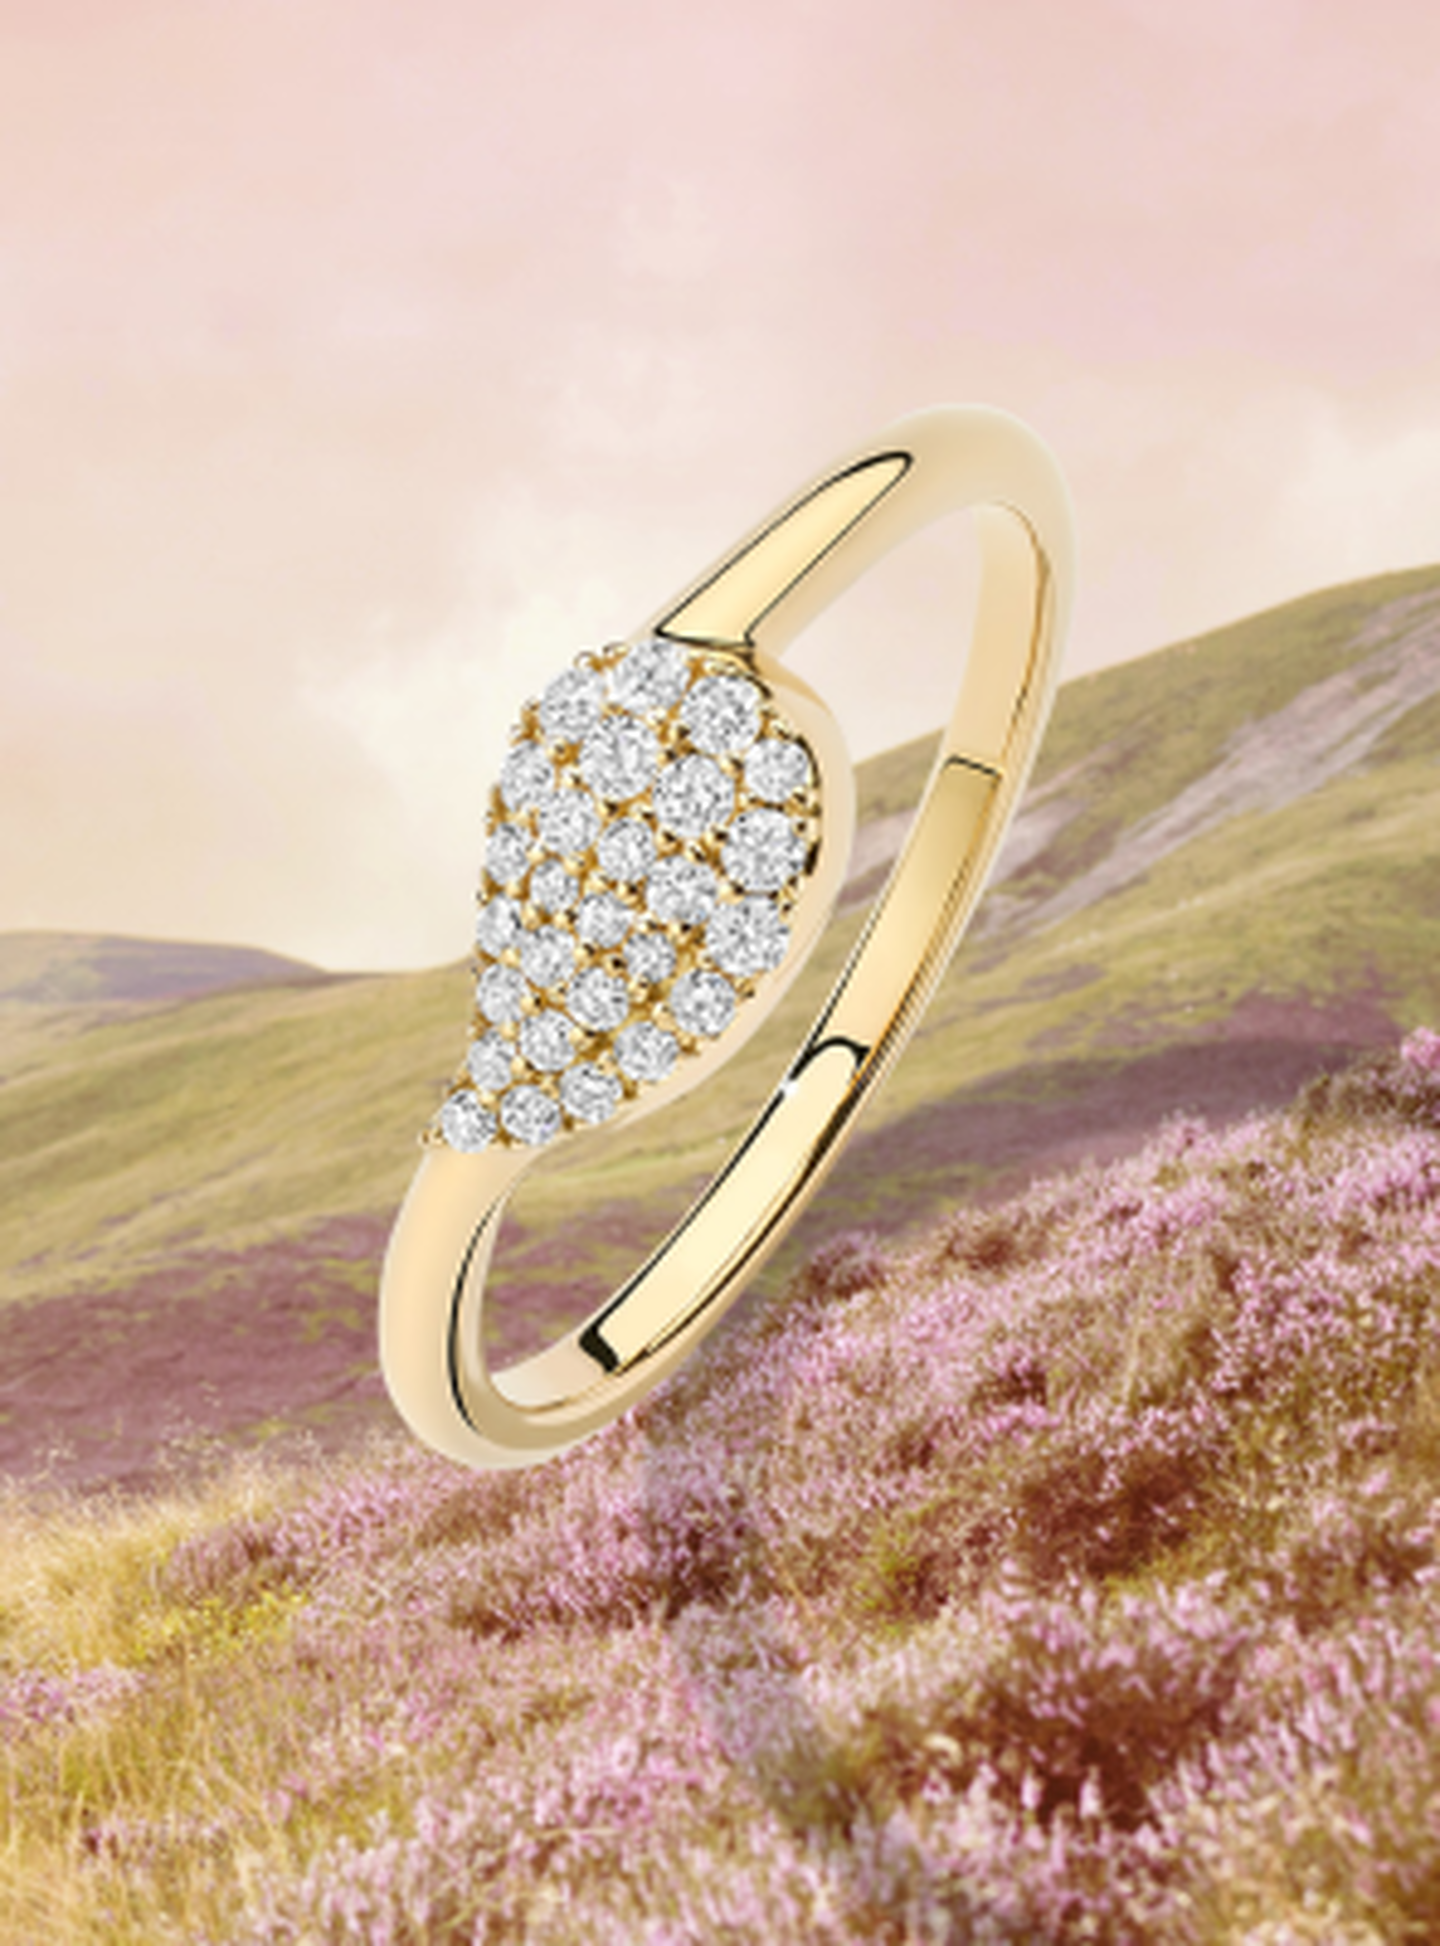 Birks Pétale yellow gold and diamond ring on a field background.